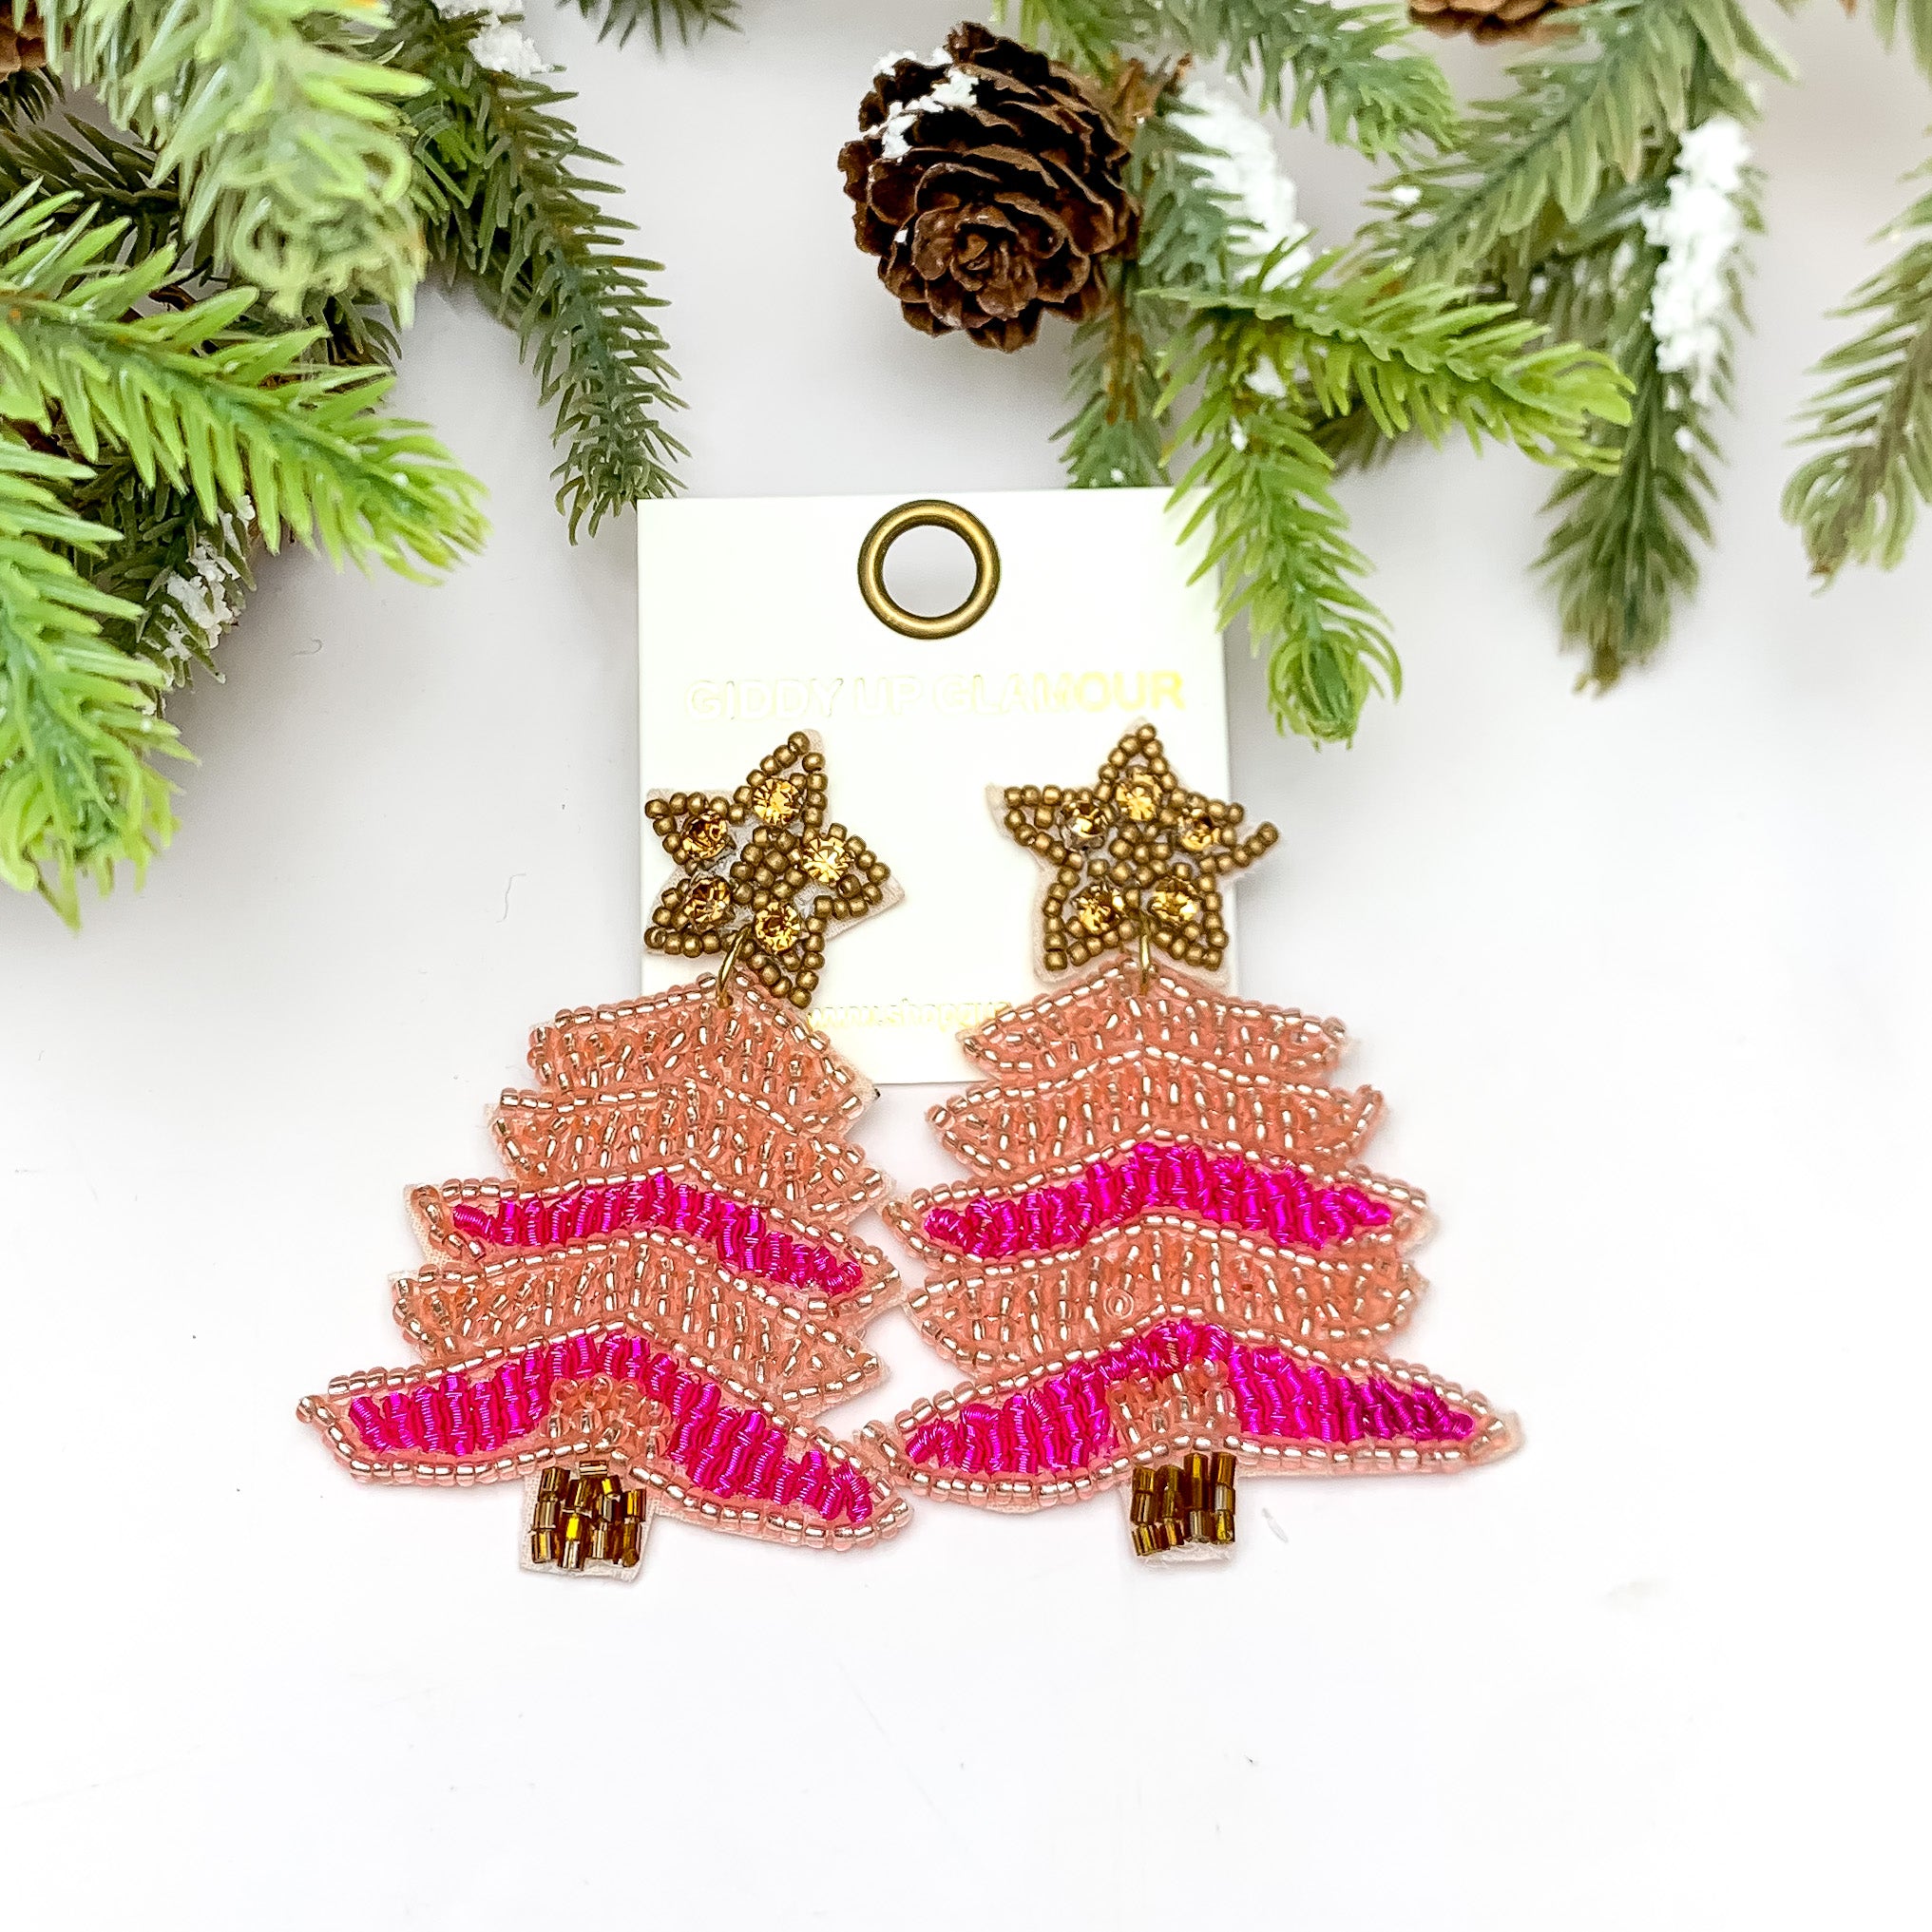 Pink Shades Beaded Christmas Tree Earrings With Gold Star Post. These earrings are pictured on a white background with a tree and pine cones at the top.